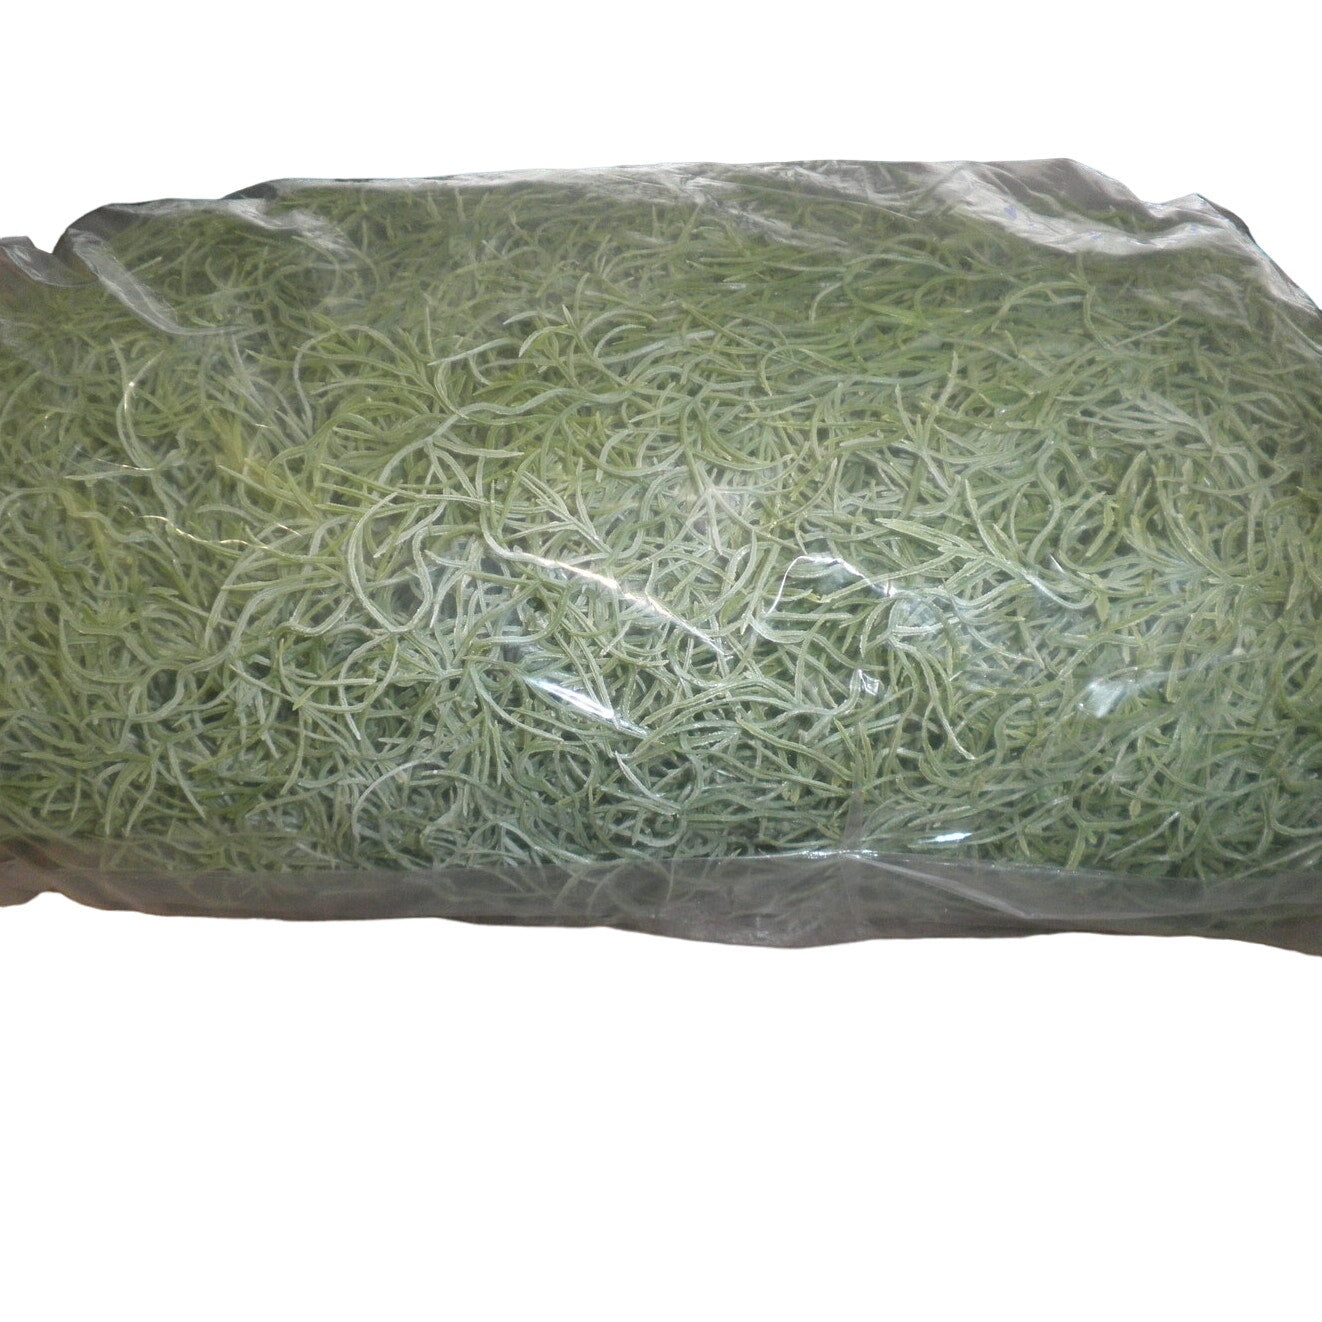 15 Pieces Faux Spanish Greenery Moss for Crafts, Potted Plants & Arrangements